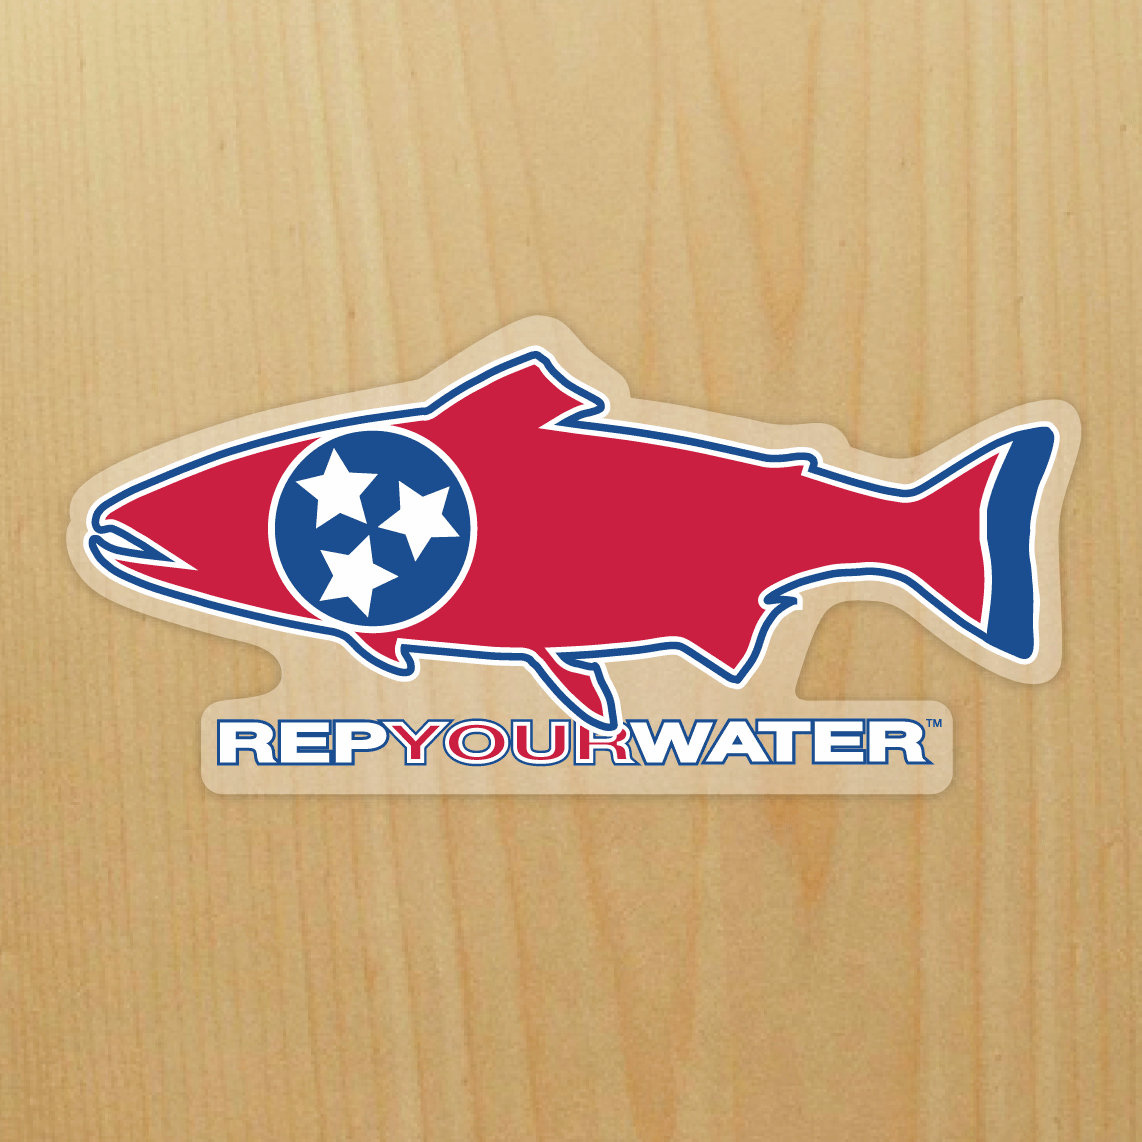 A wood background has a sticker on it in the shape of a trout that has a circle filled with three stars inside of it and the words repyourwater below it